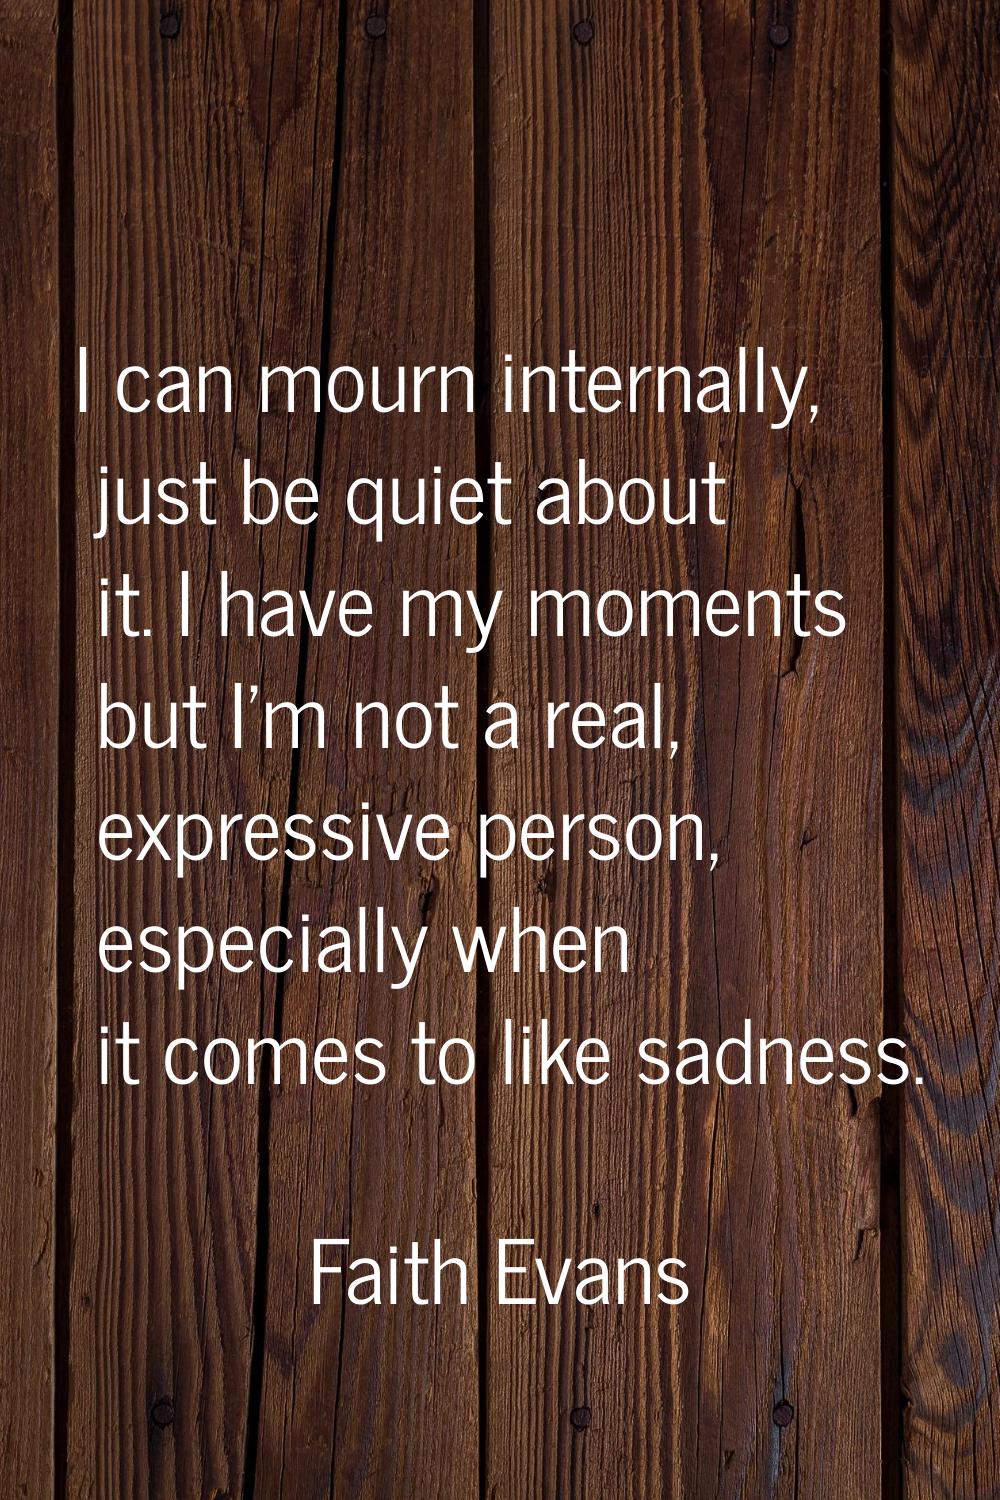 I can mourn internally, just be quiet about it. I have my moments but I'm not a real, expressive pe